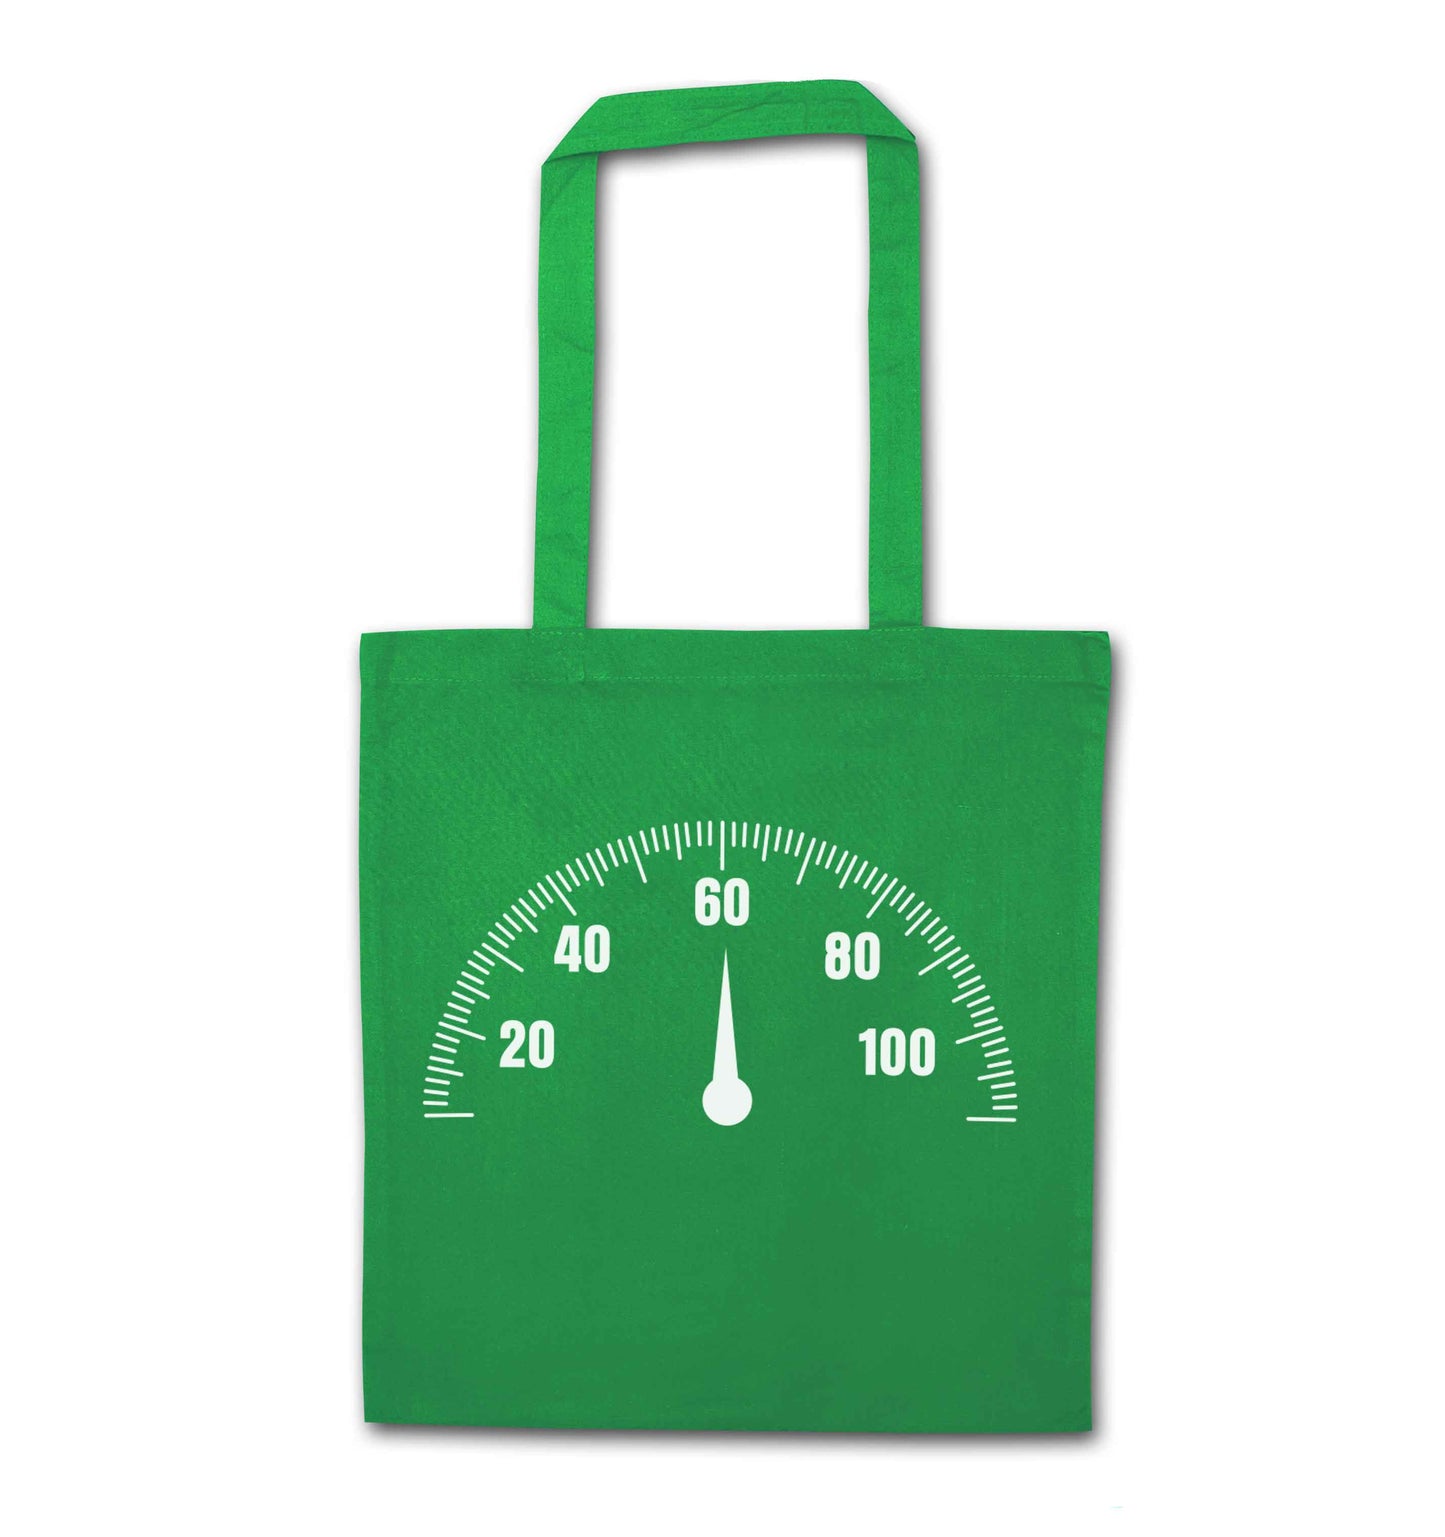 Speed dial 60 green tote bag